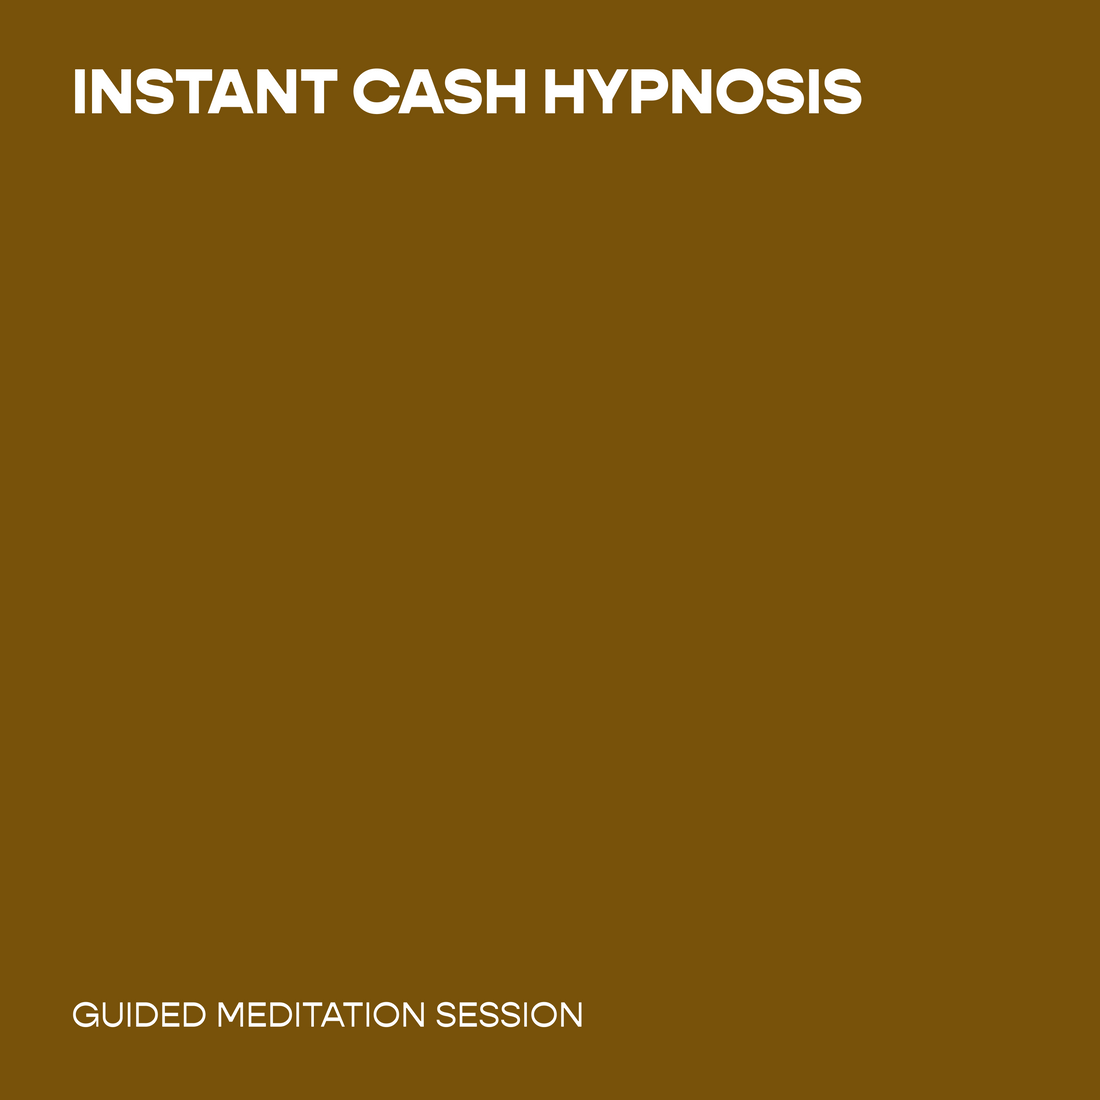 Instant Cash Hypnosis